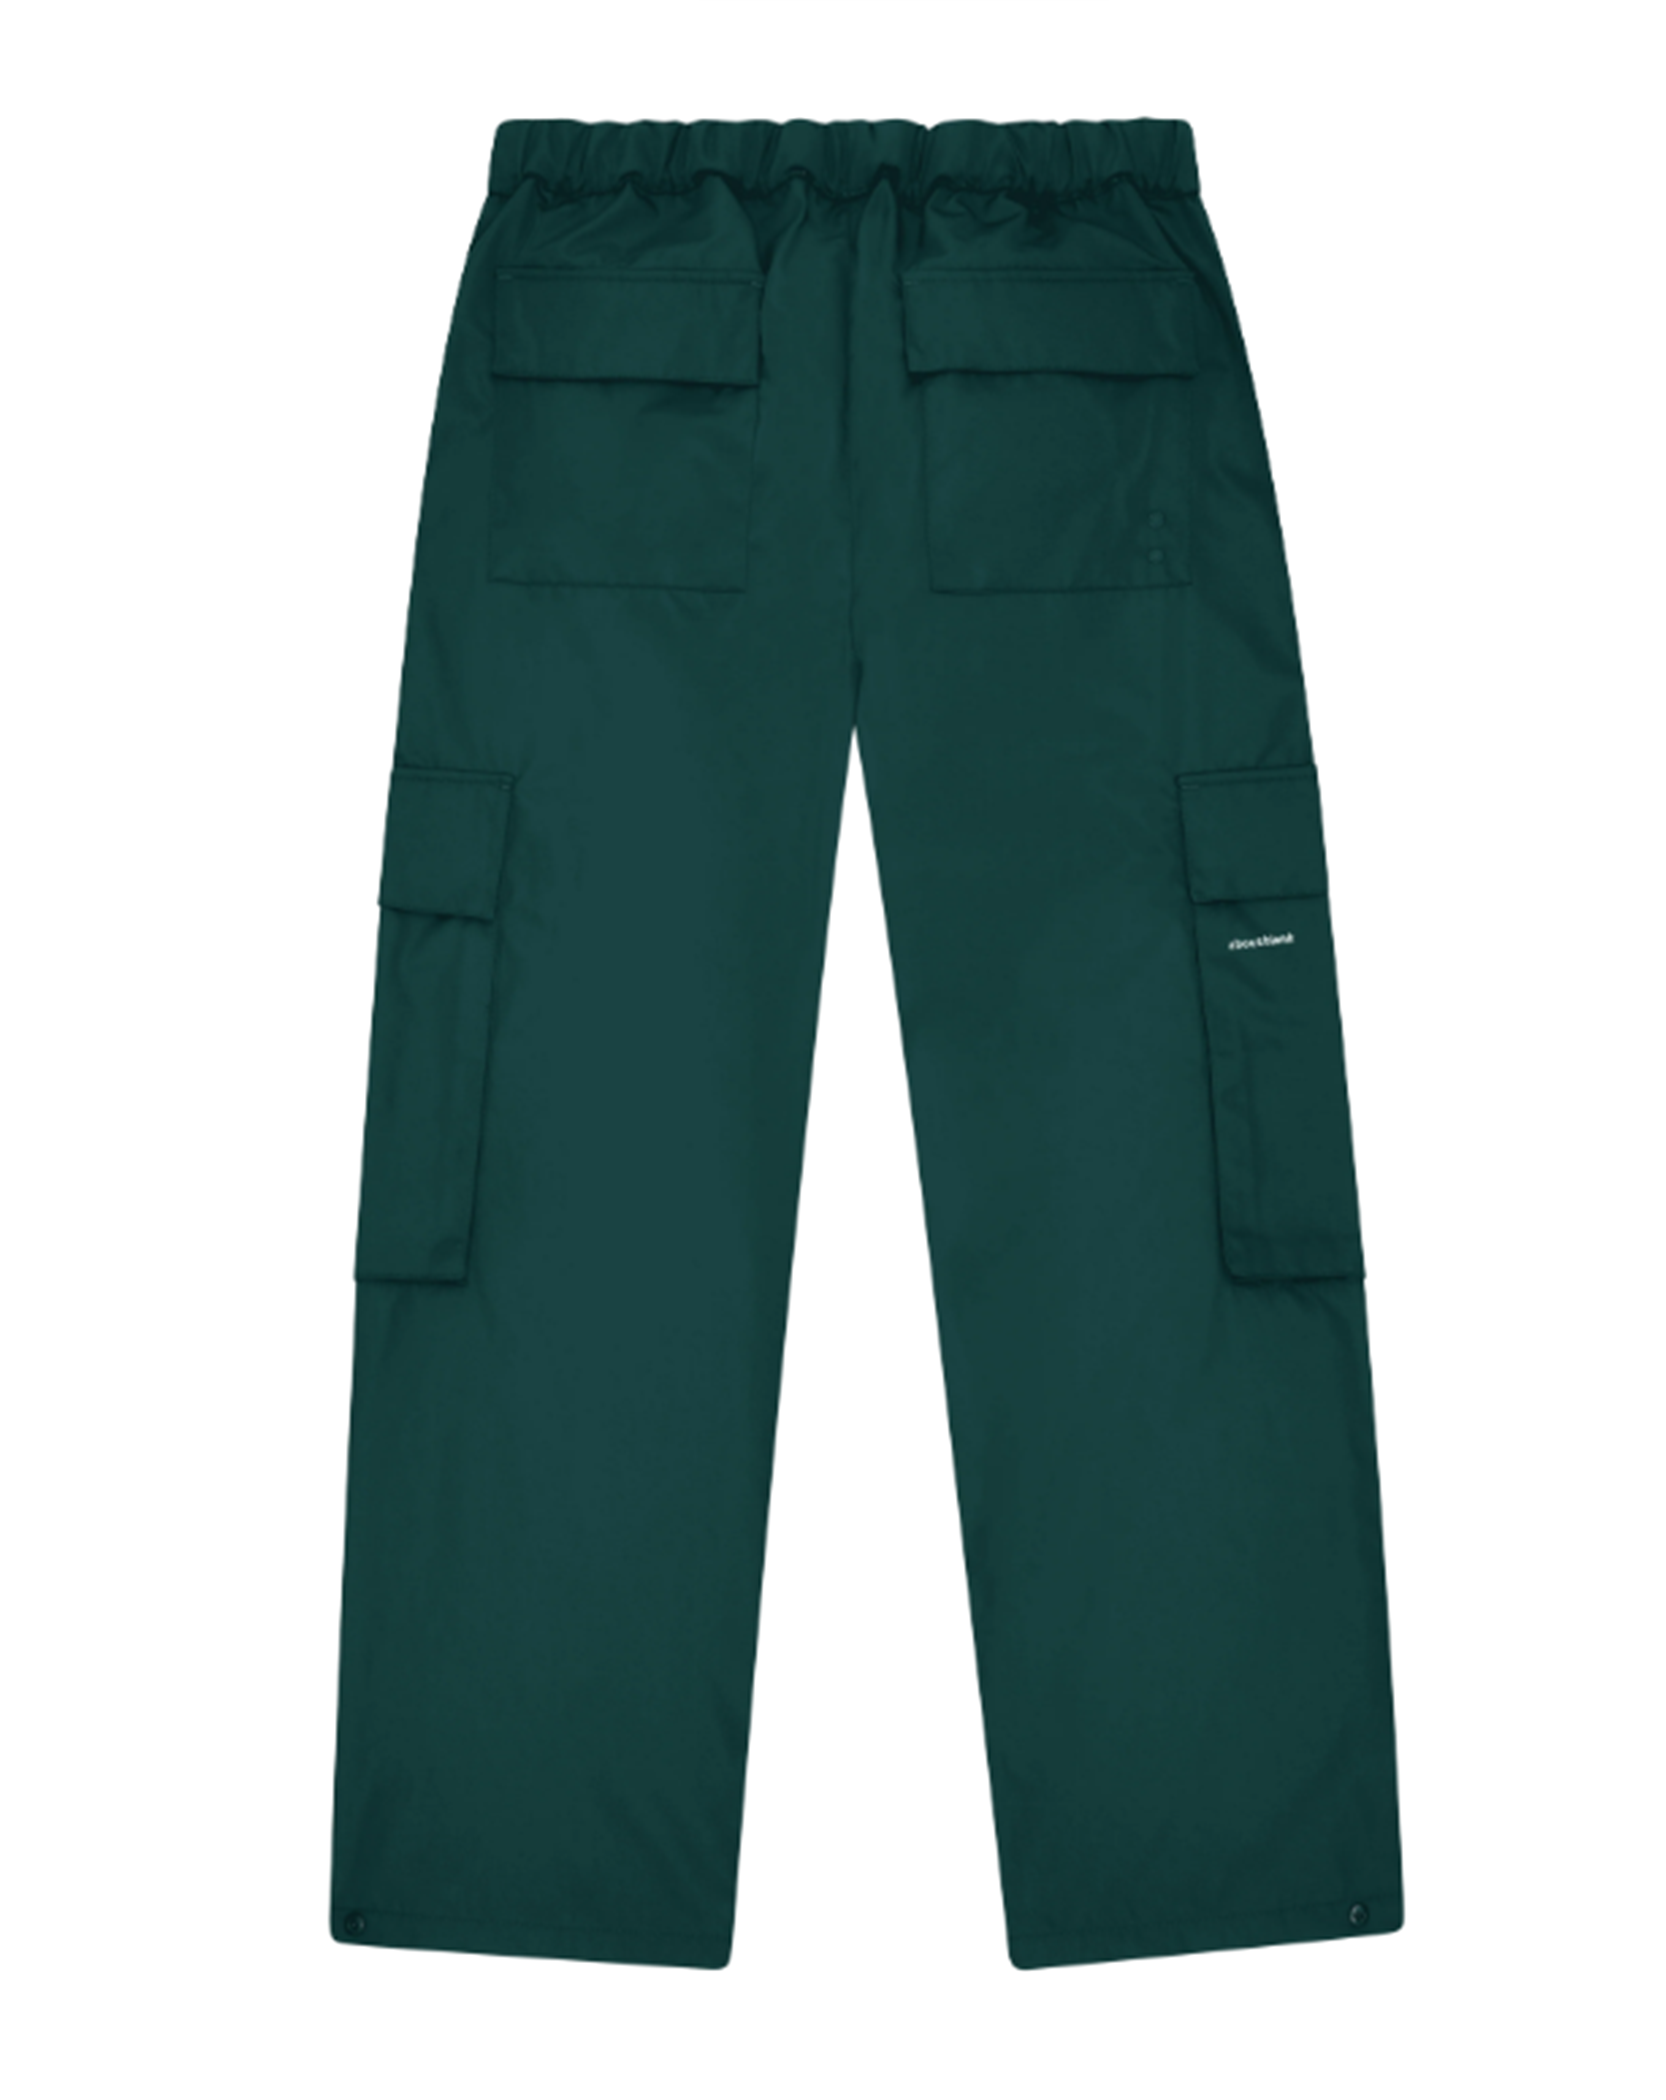 About blank - utility pant epsom green